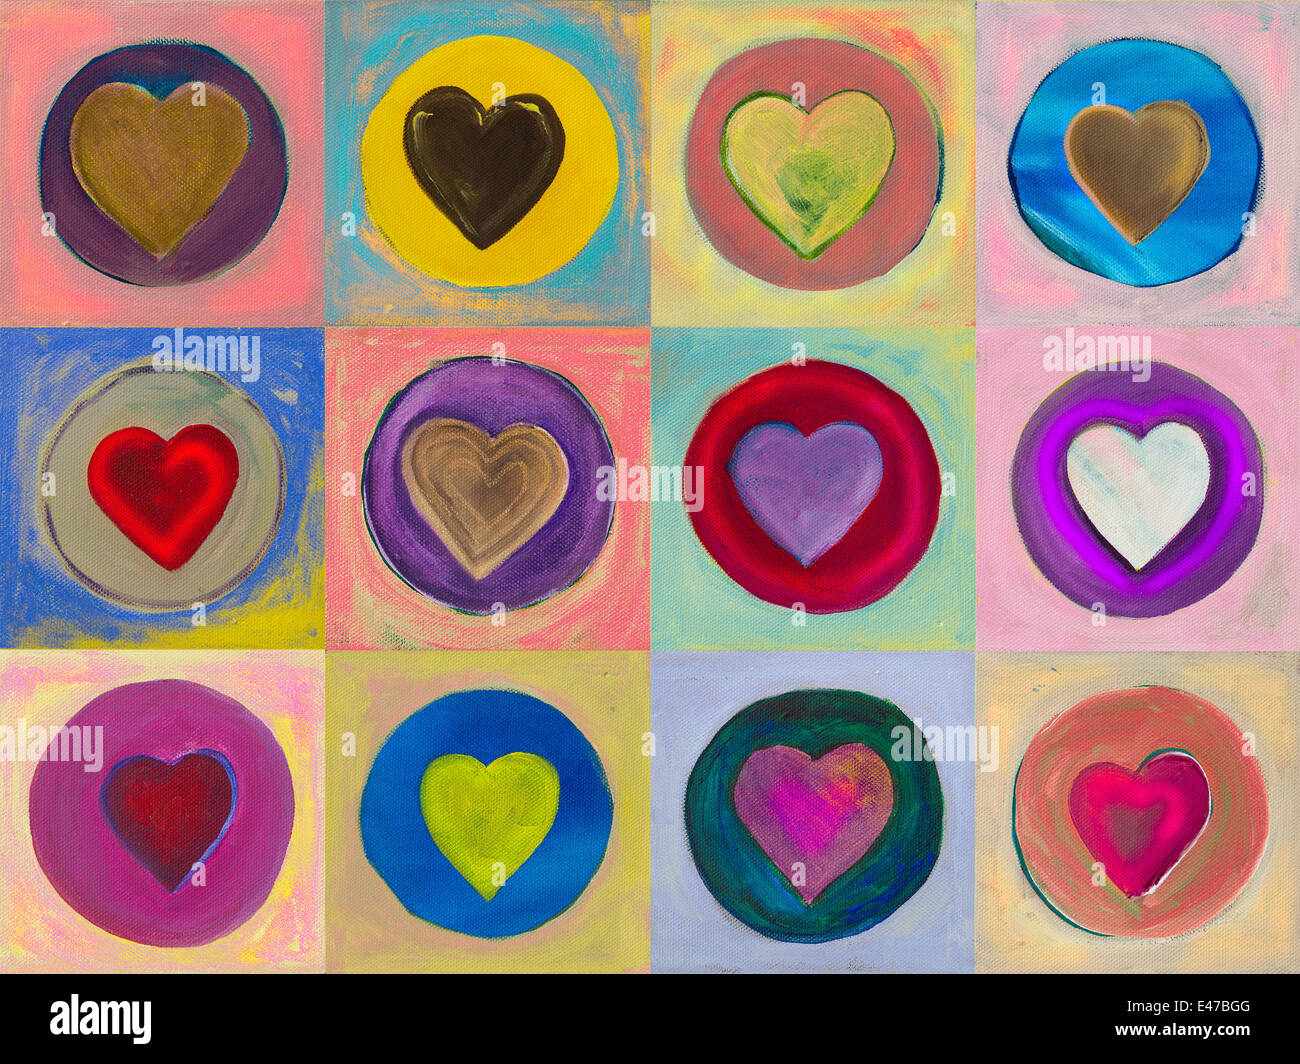 Abstract art, contemporary geometric painting. For the love of hearts. Stock Photo